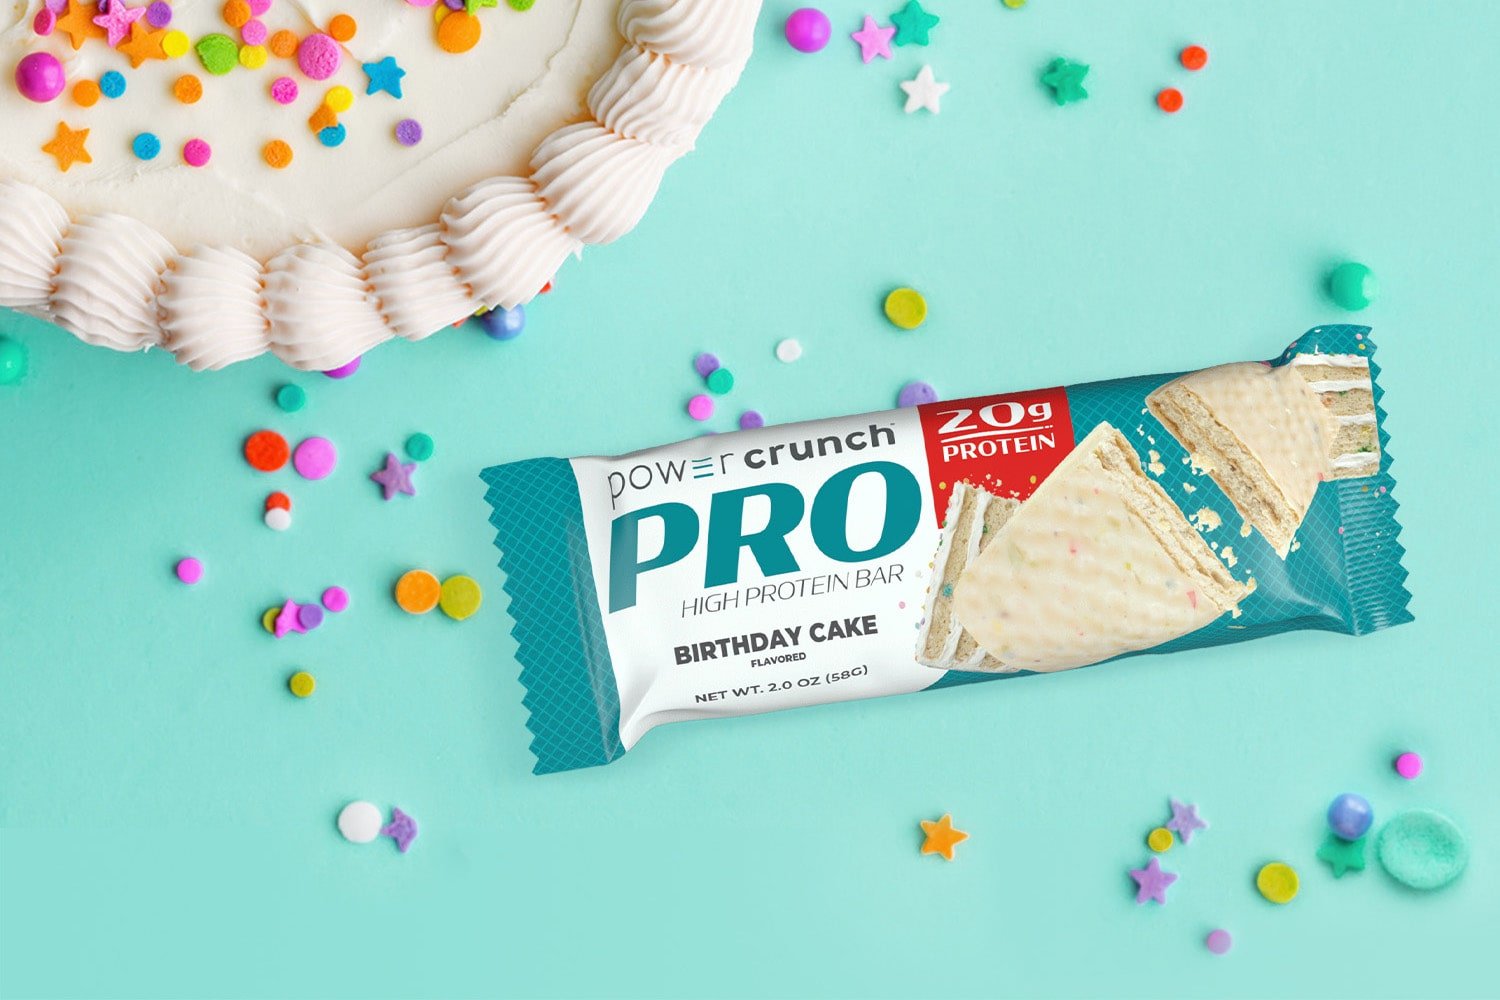 Birthday Cake high protein bars as an on-the-go snack